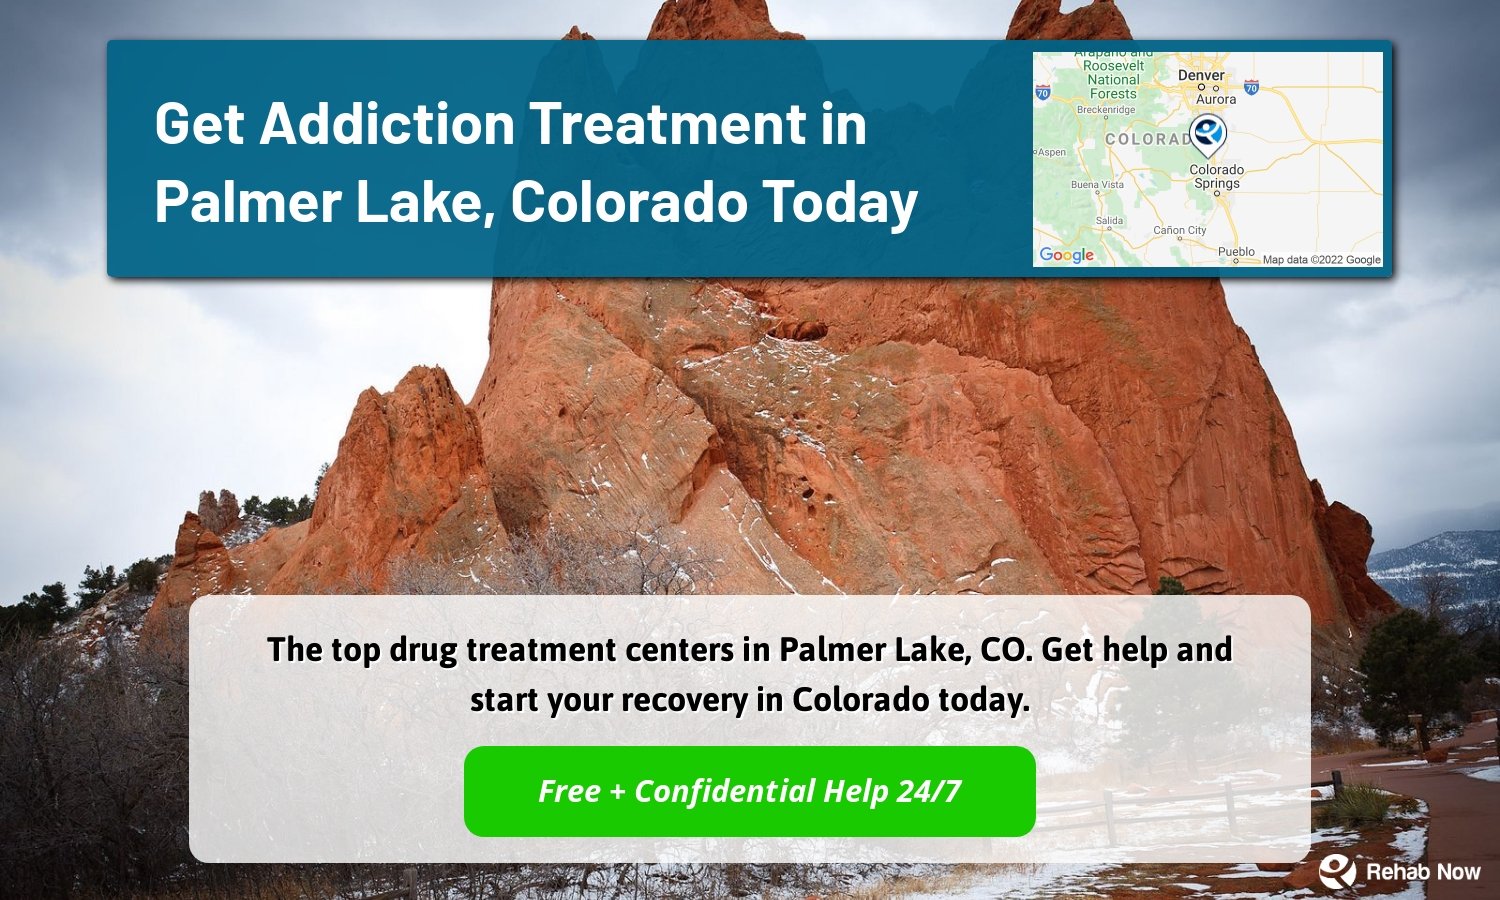 The top drug treatment centers in Palmer Lake, CO. Get help and start your recovery in Colorado today.